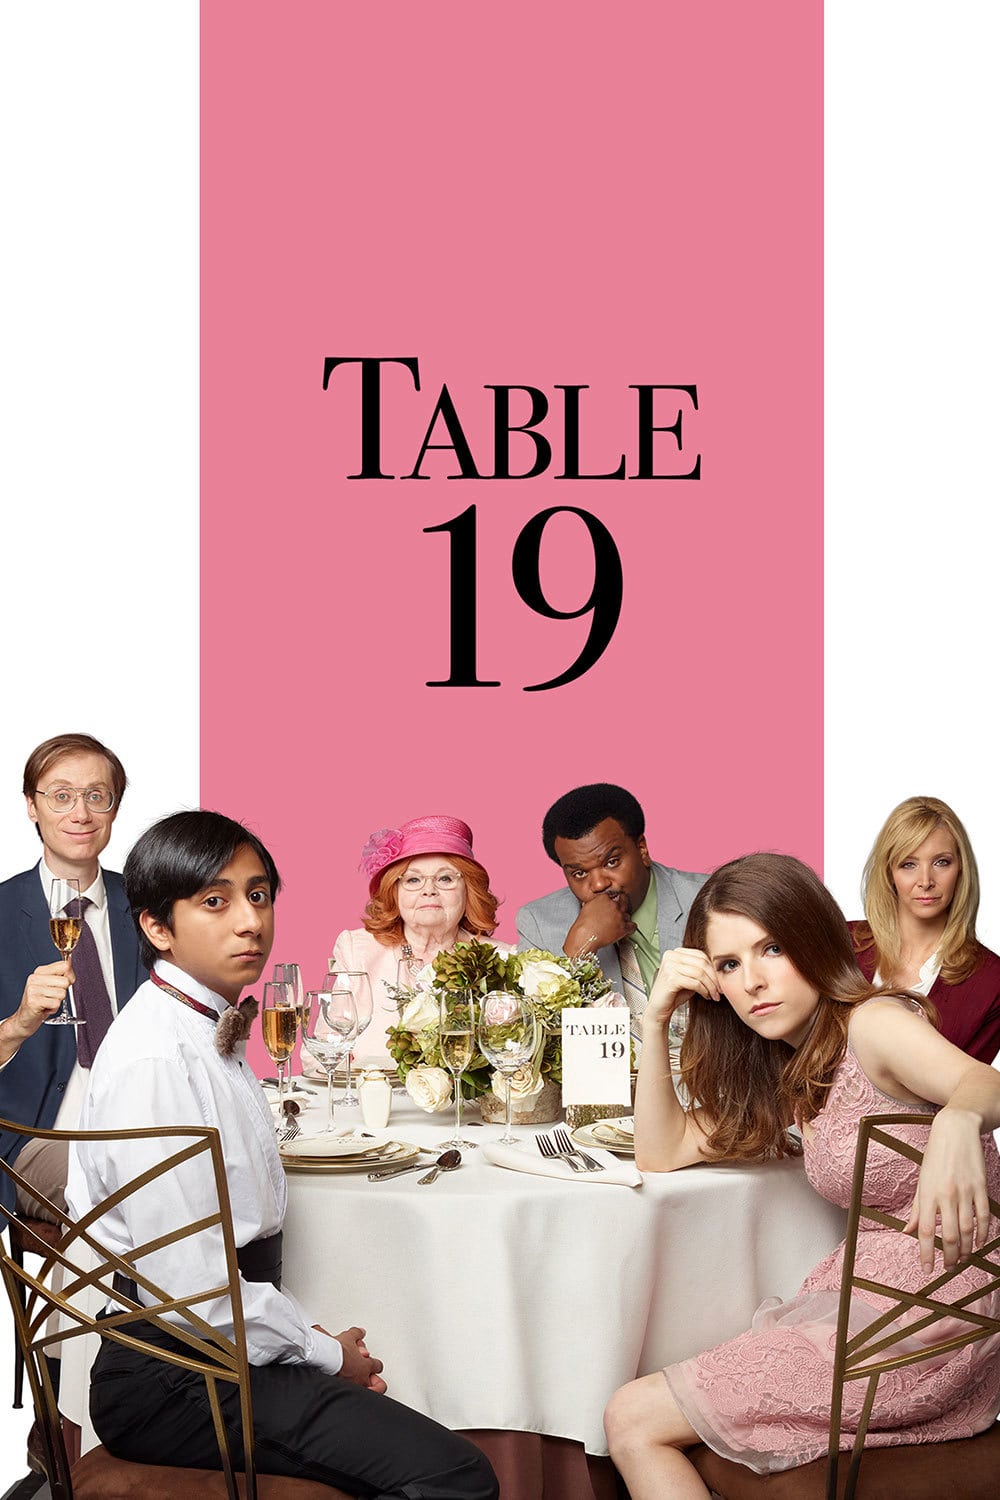 Poster for the movie "Table 19"